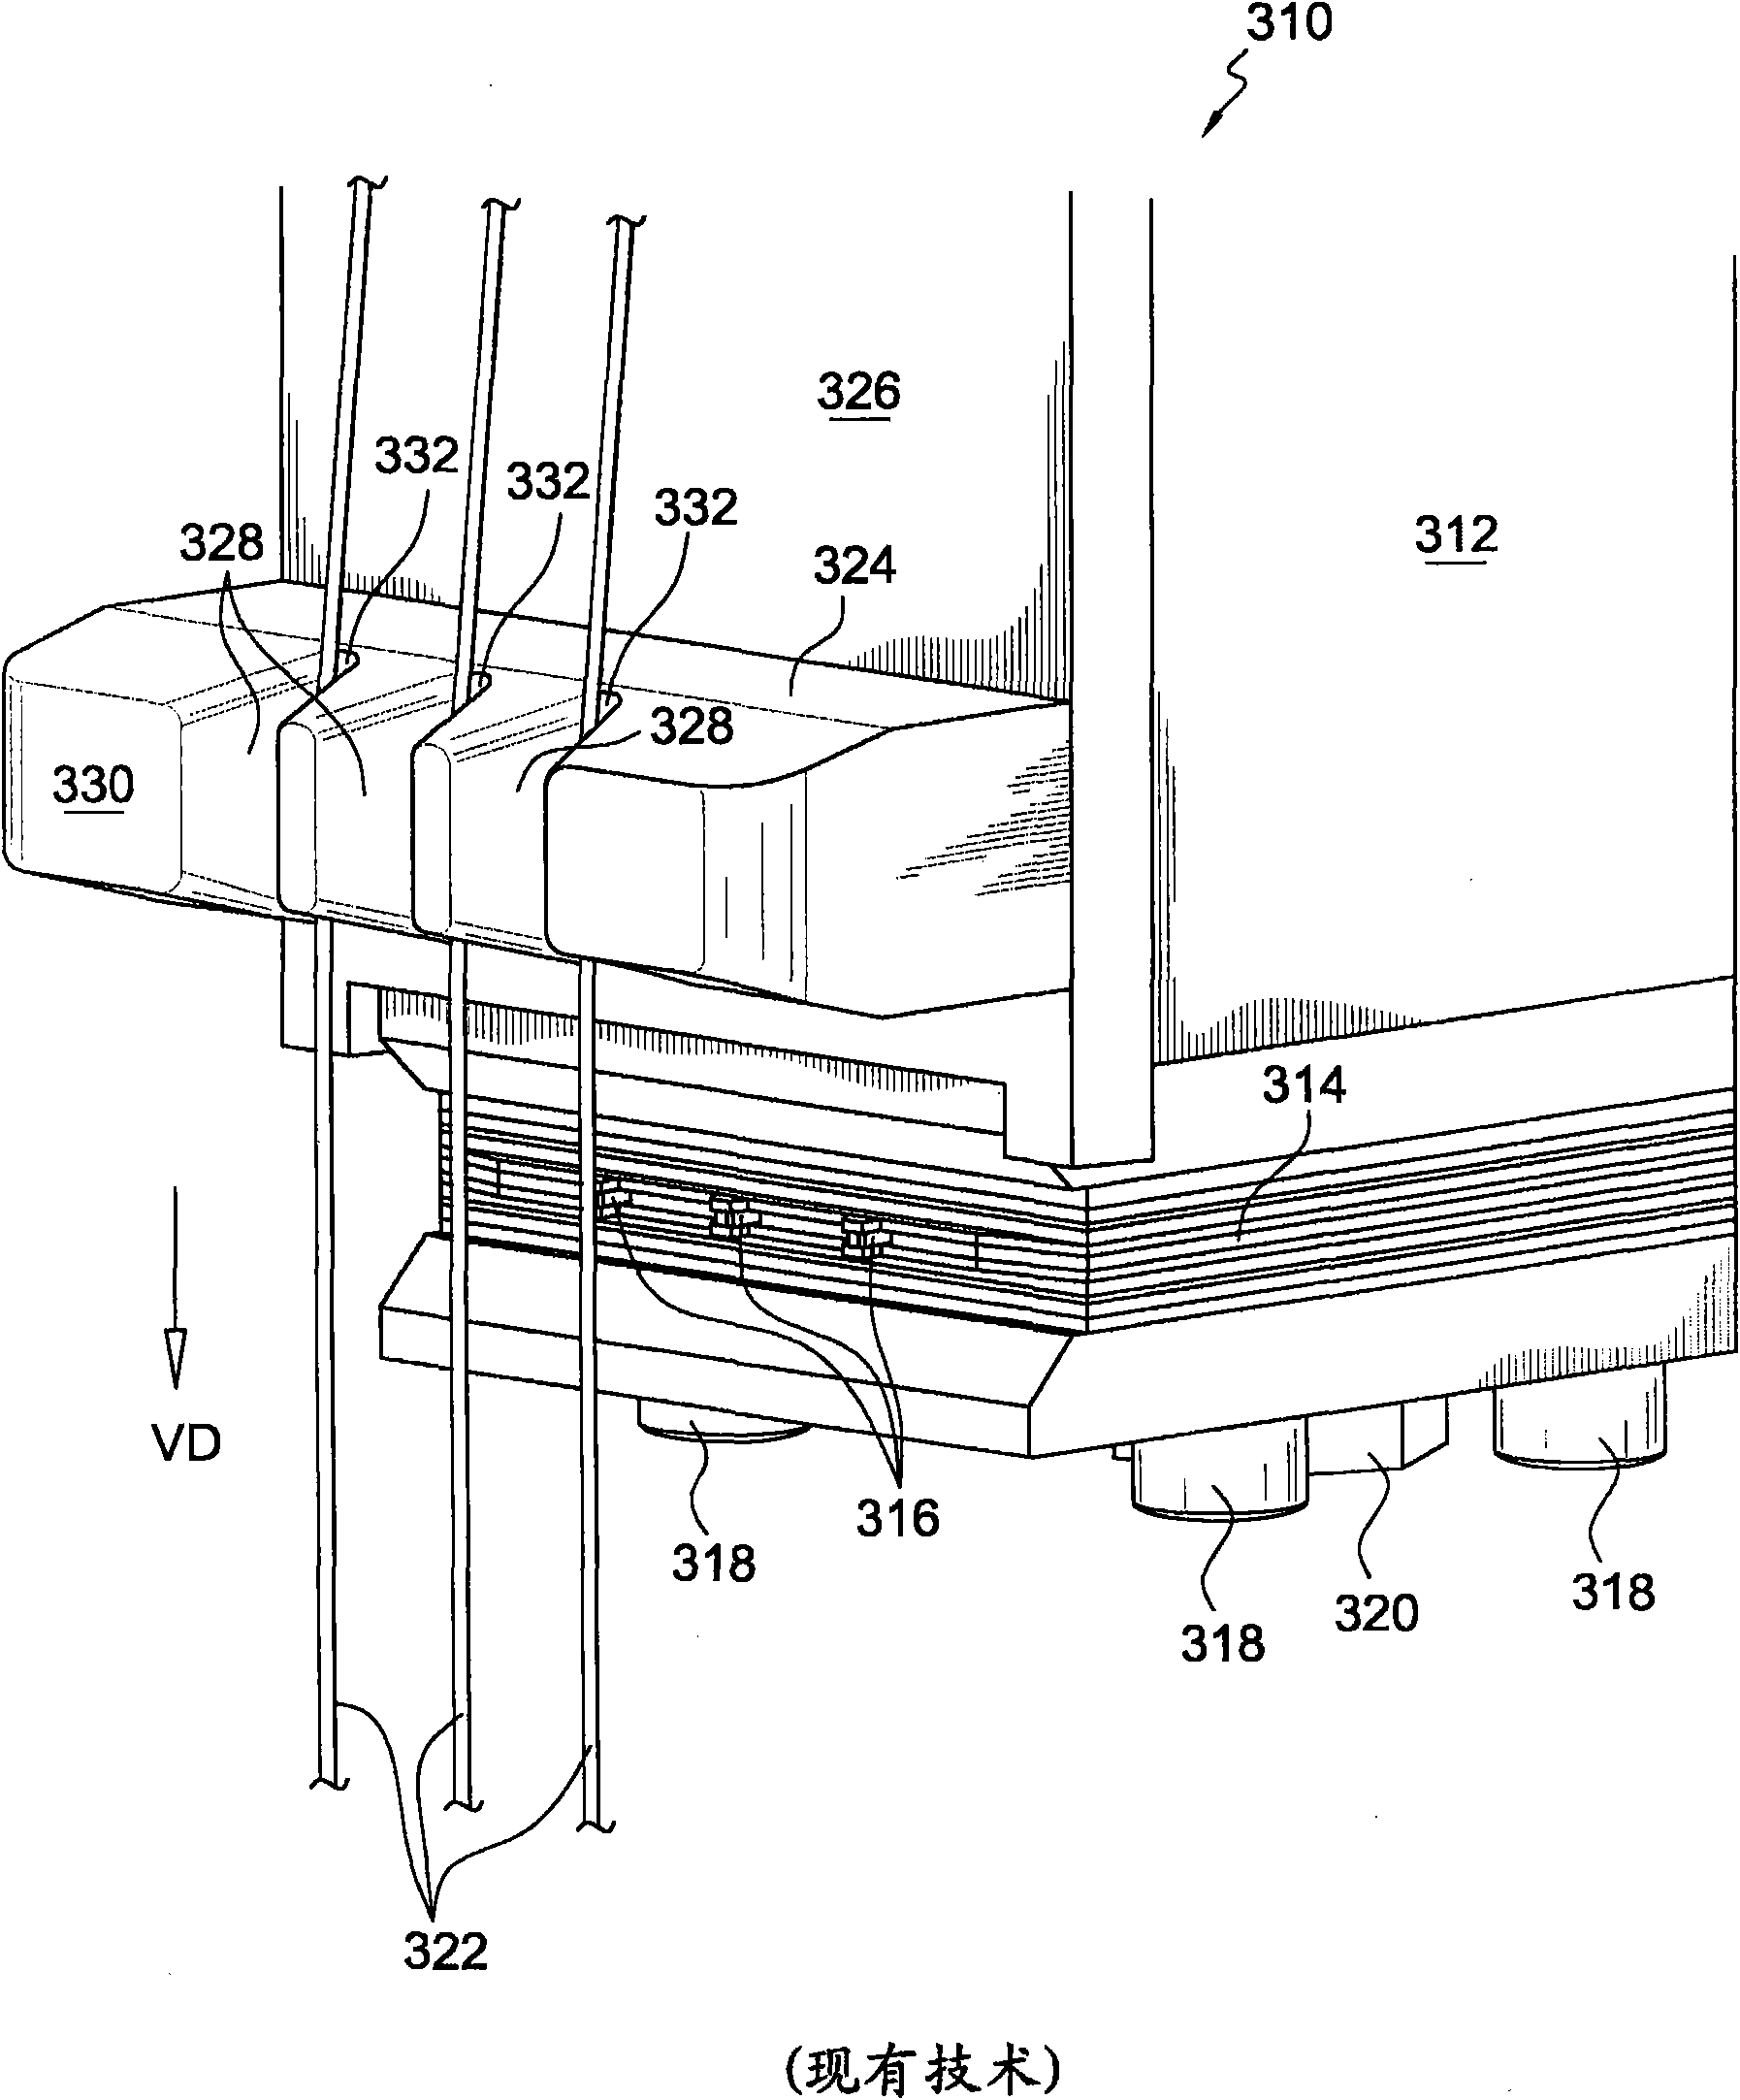 Strand positioning guide having reversely oriented v-shaped slots for use in connection with strand coating applicators